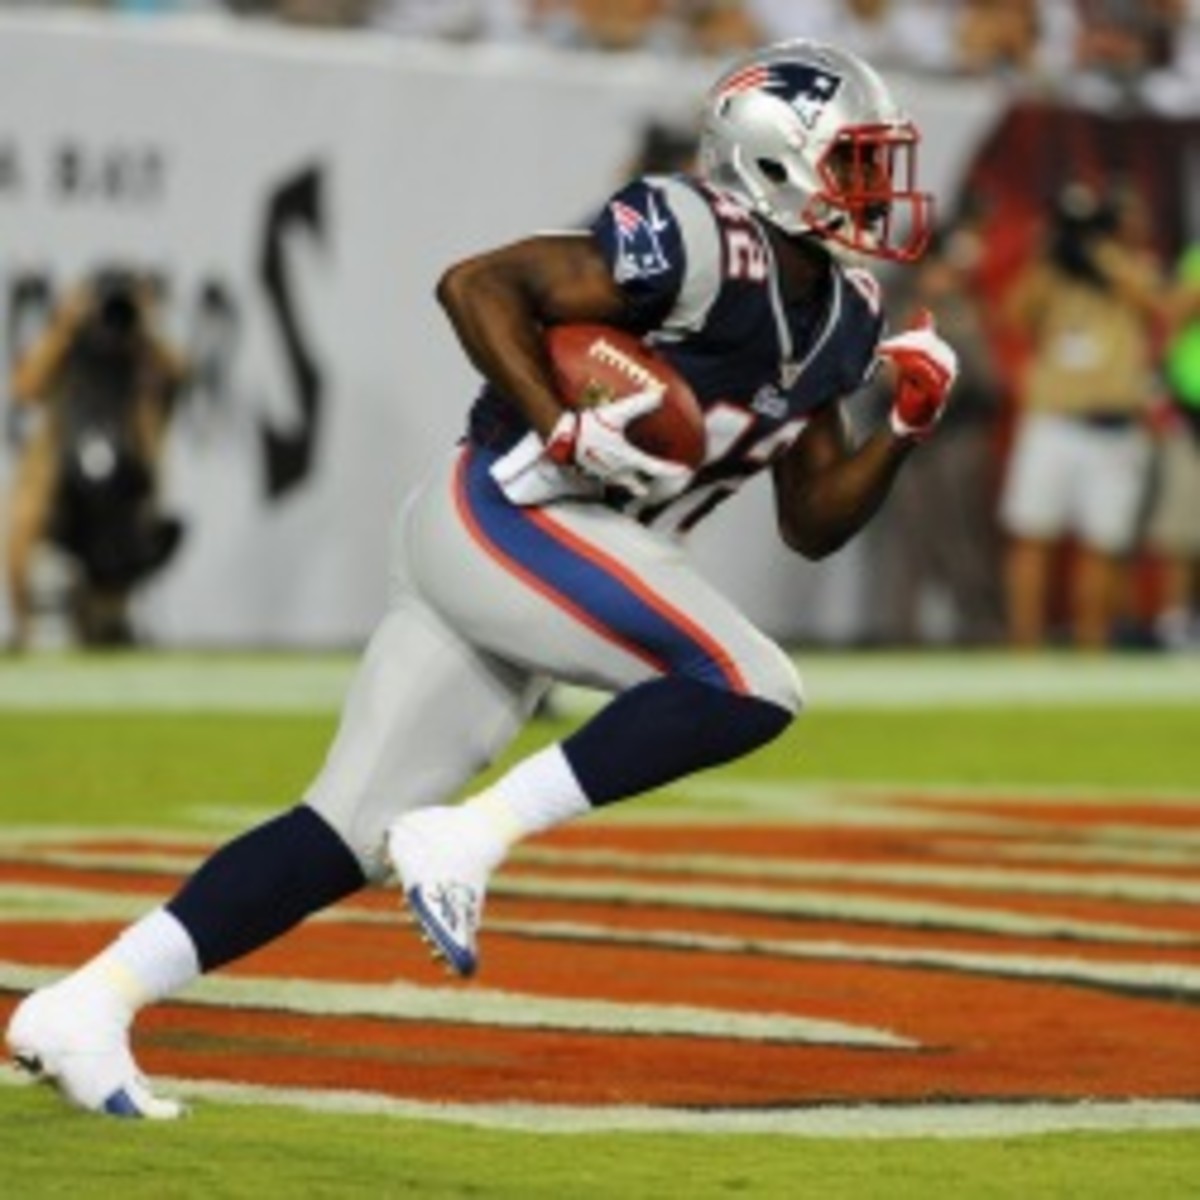 Patriots running back Jeff Demps plans a return to the track leaving his future with the team in doubt. (Al Messerschmidt/Getty Images)